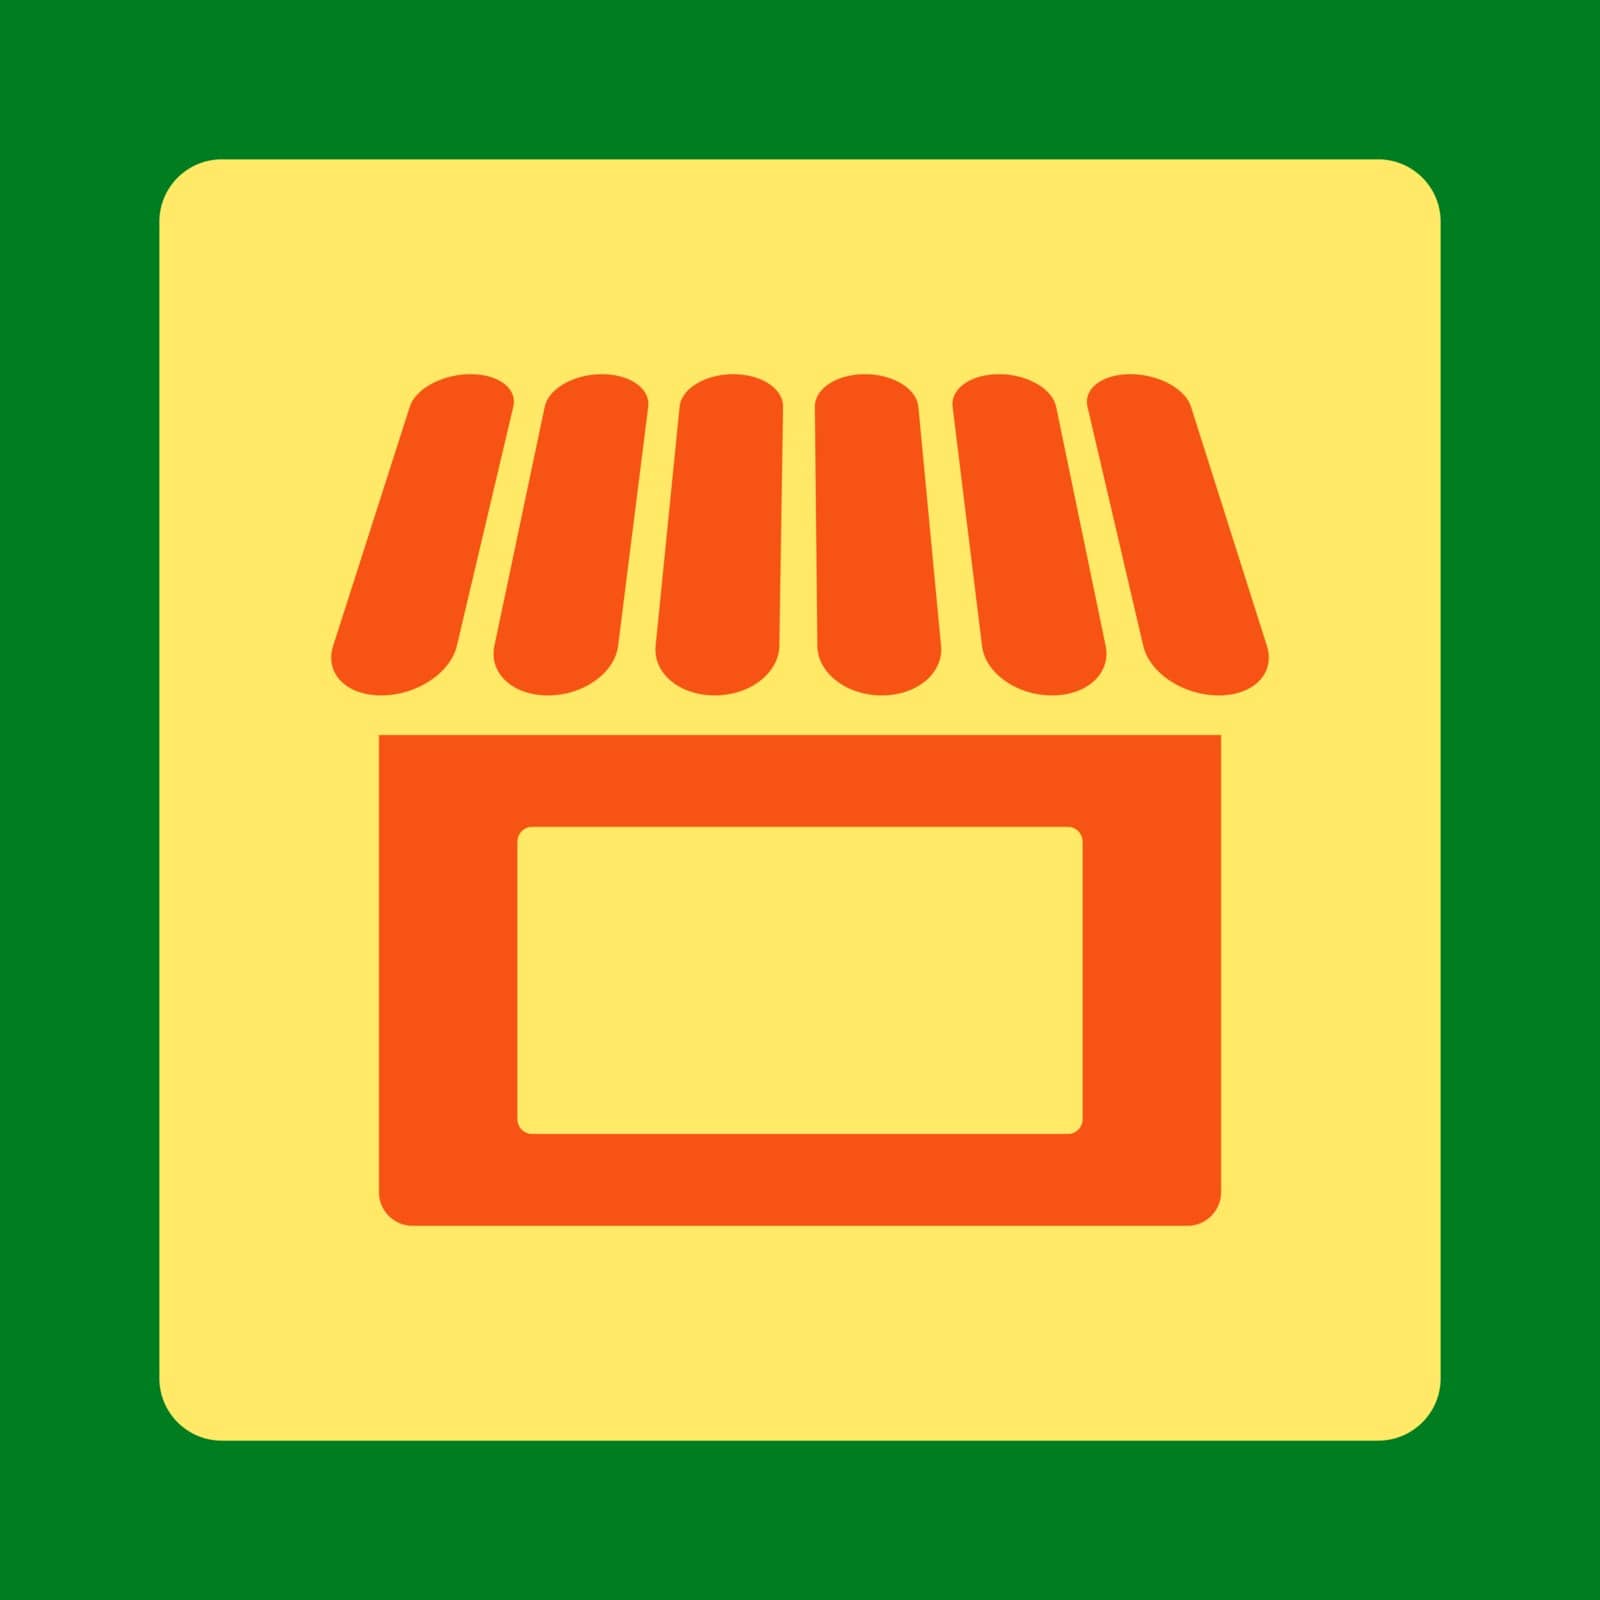 Shop icon. This flat rounded square button uses orange and yellow colors and isolated on a green background.